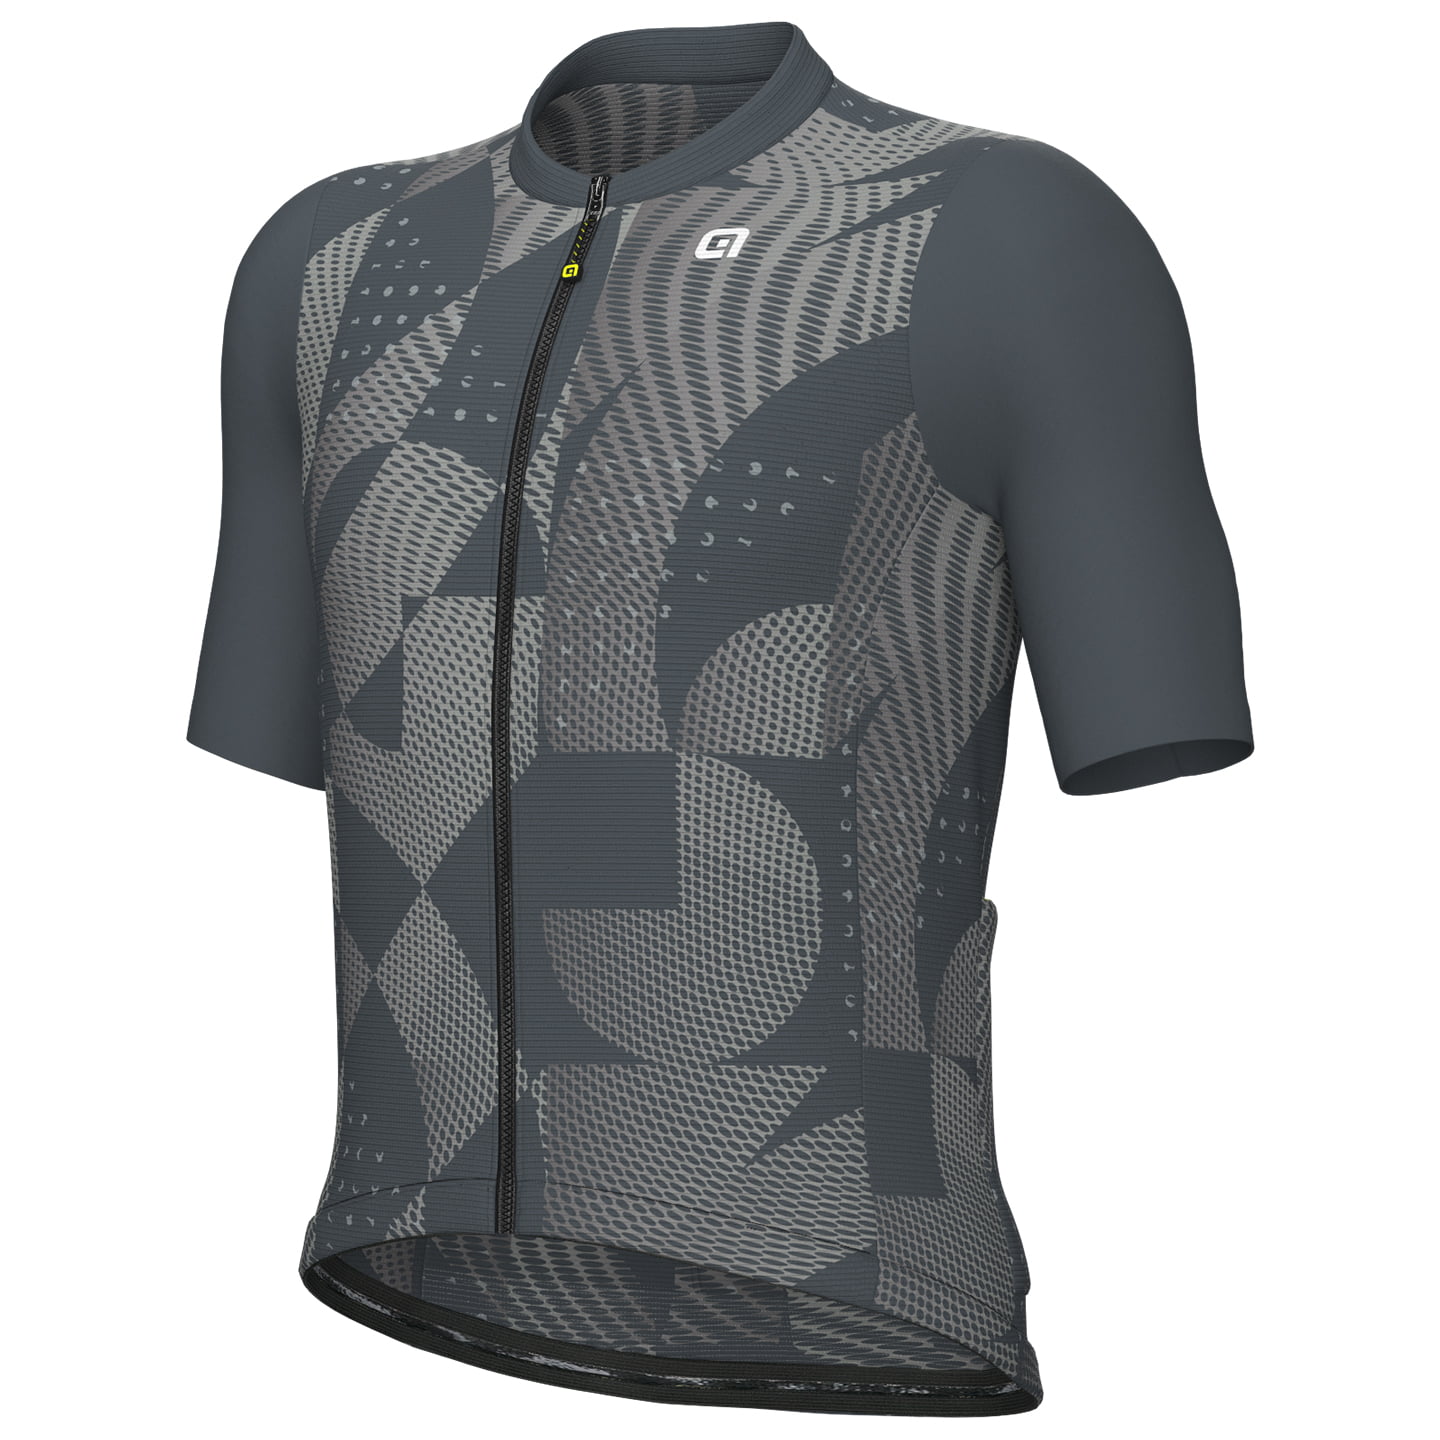 ALE Enjoy Short Sleeve Jersey, for men, size S, Cycling jersey, Cycling clothing